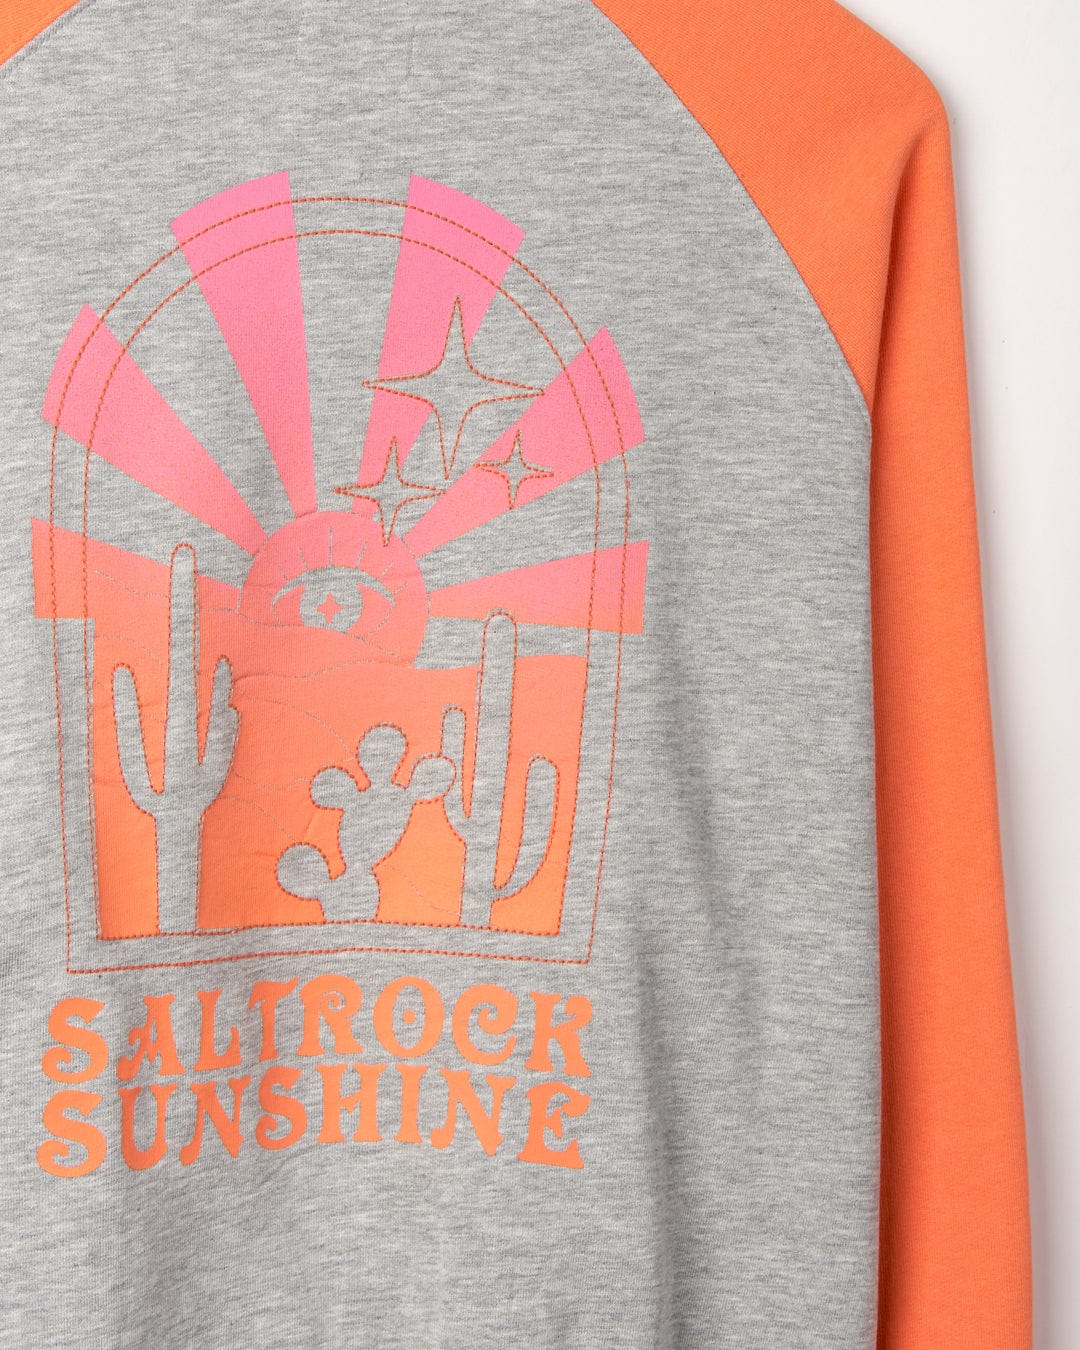 Close-up of a Saltrock Sunshine - Womens Raglan Sweat - Grey Marl fabric shirt with a graphic of a sunrise, cacti, and stars, and the text "Saltrock Sunshine" in orange.